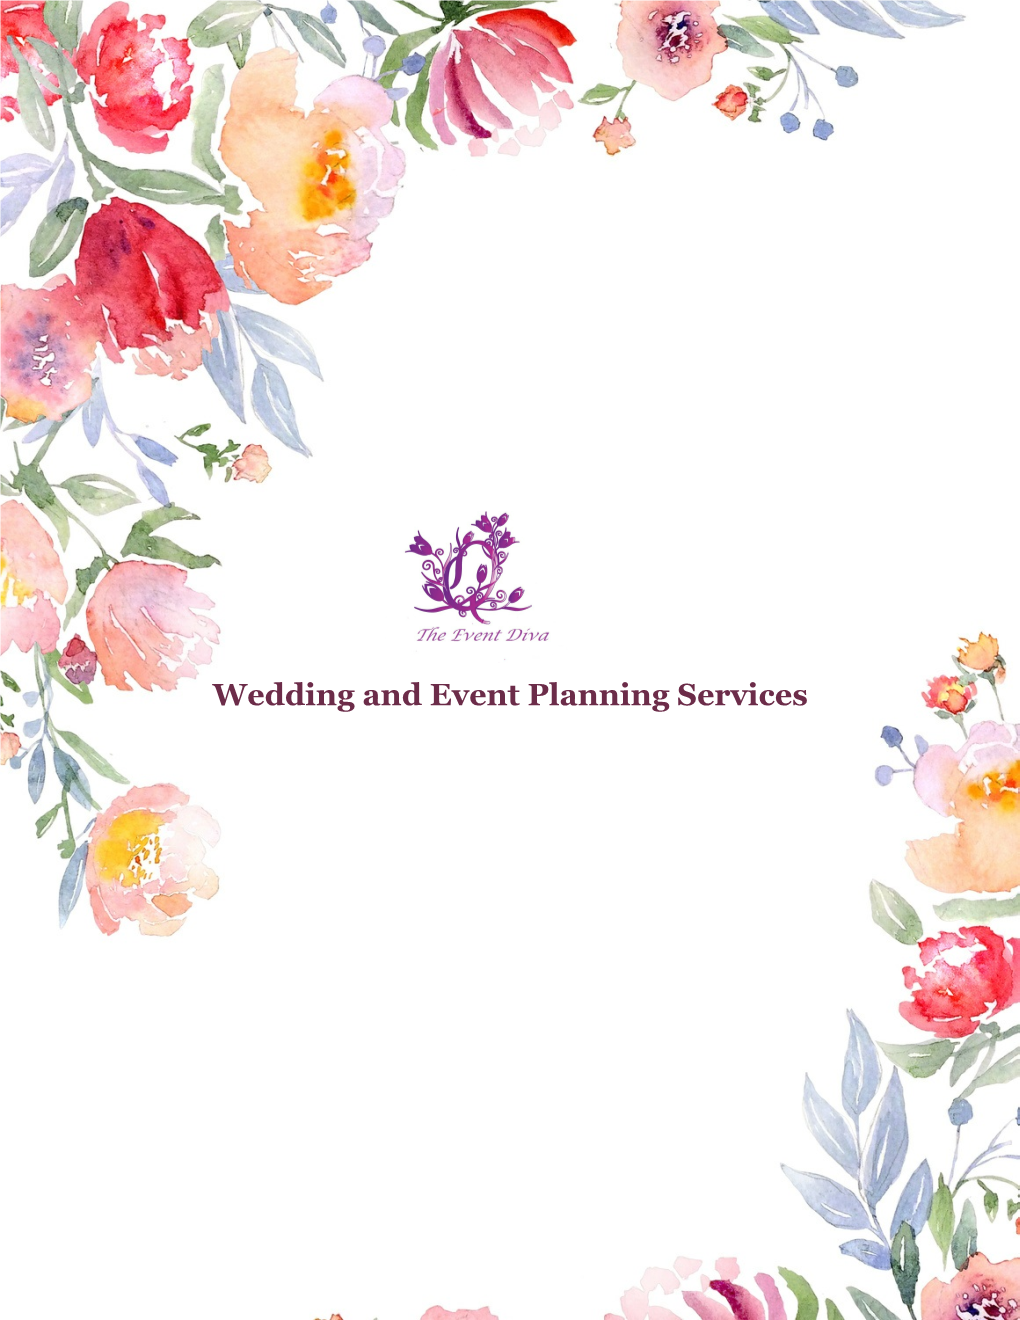 Wedding and Event Planning Services Your Trusted Partner in Much Awaited Celebrations